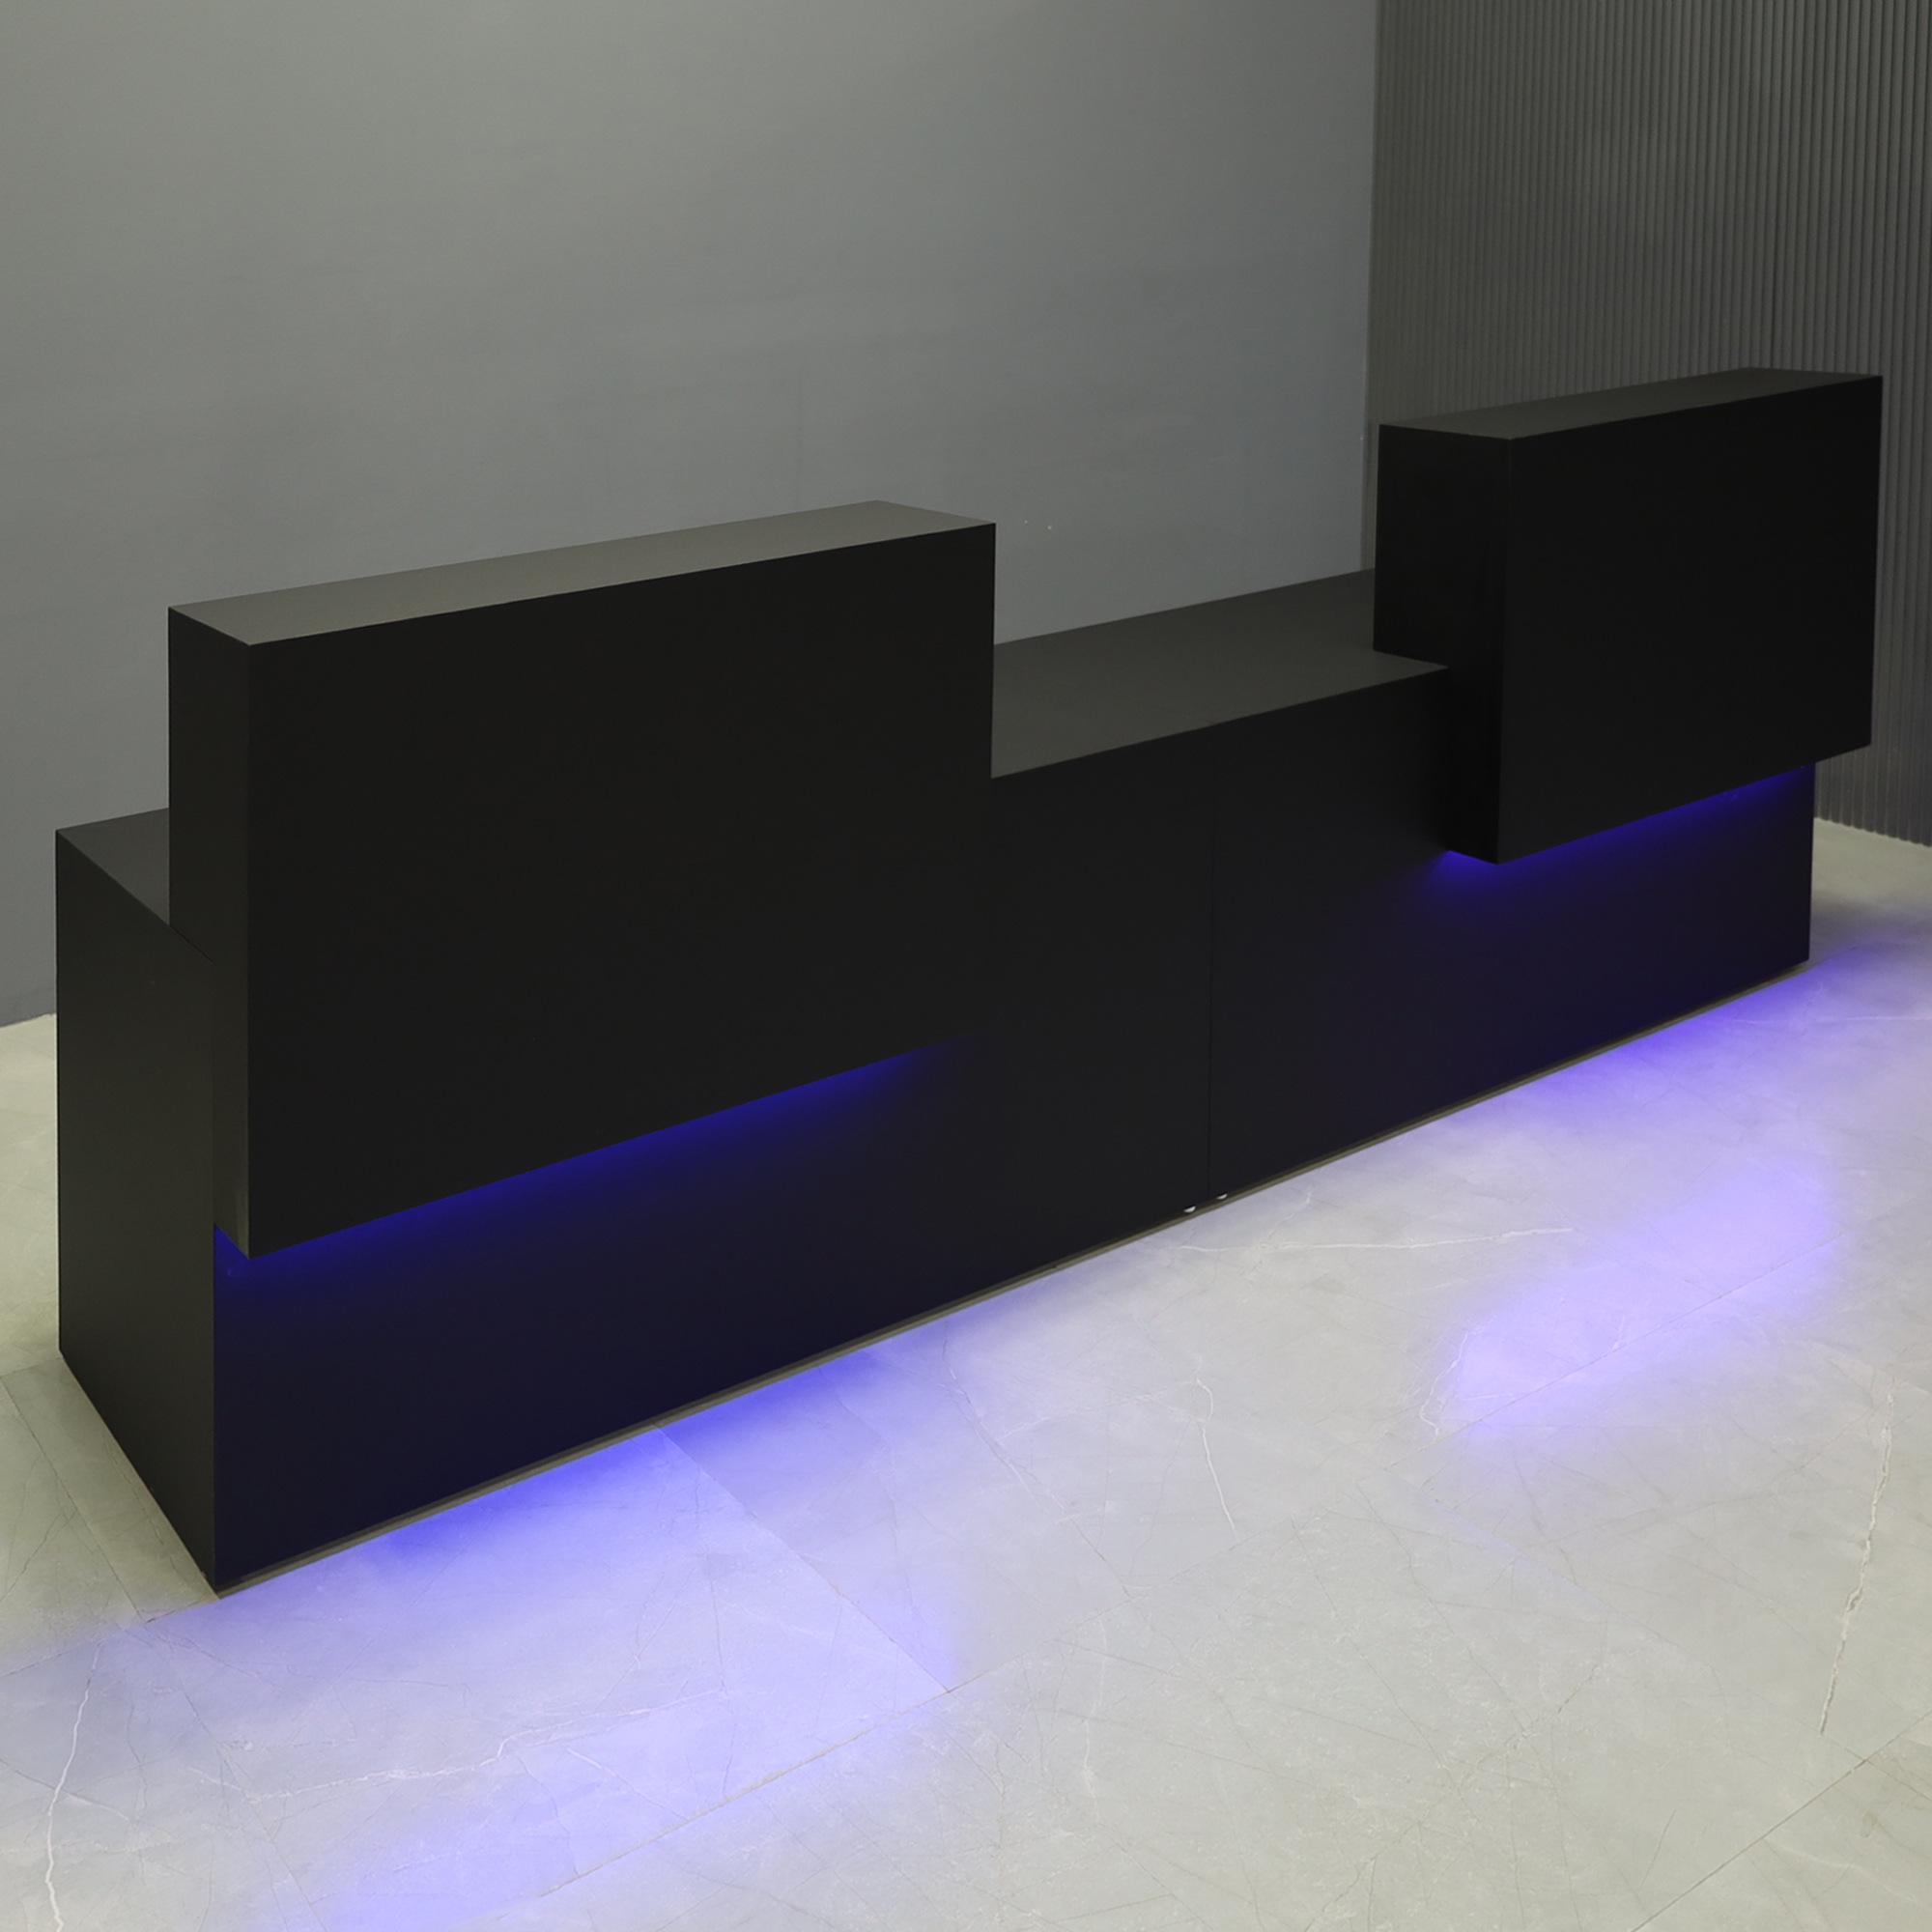 108-inch Los Angeles Double Counter Custom Reception Desk in black traceless laminate counters and desks, with color LED, shown here.